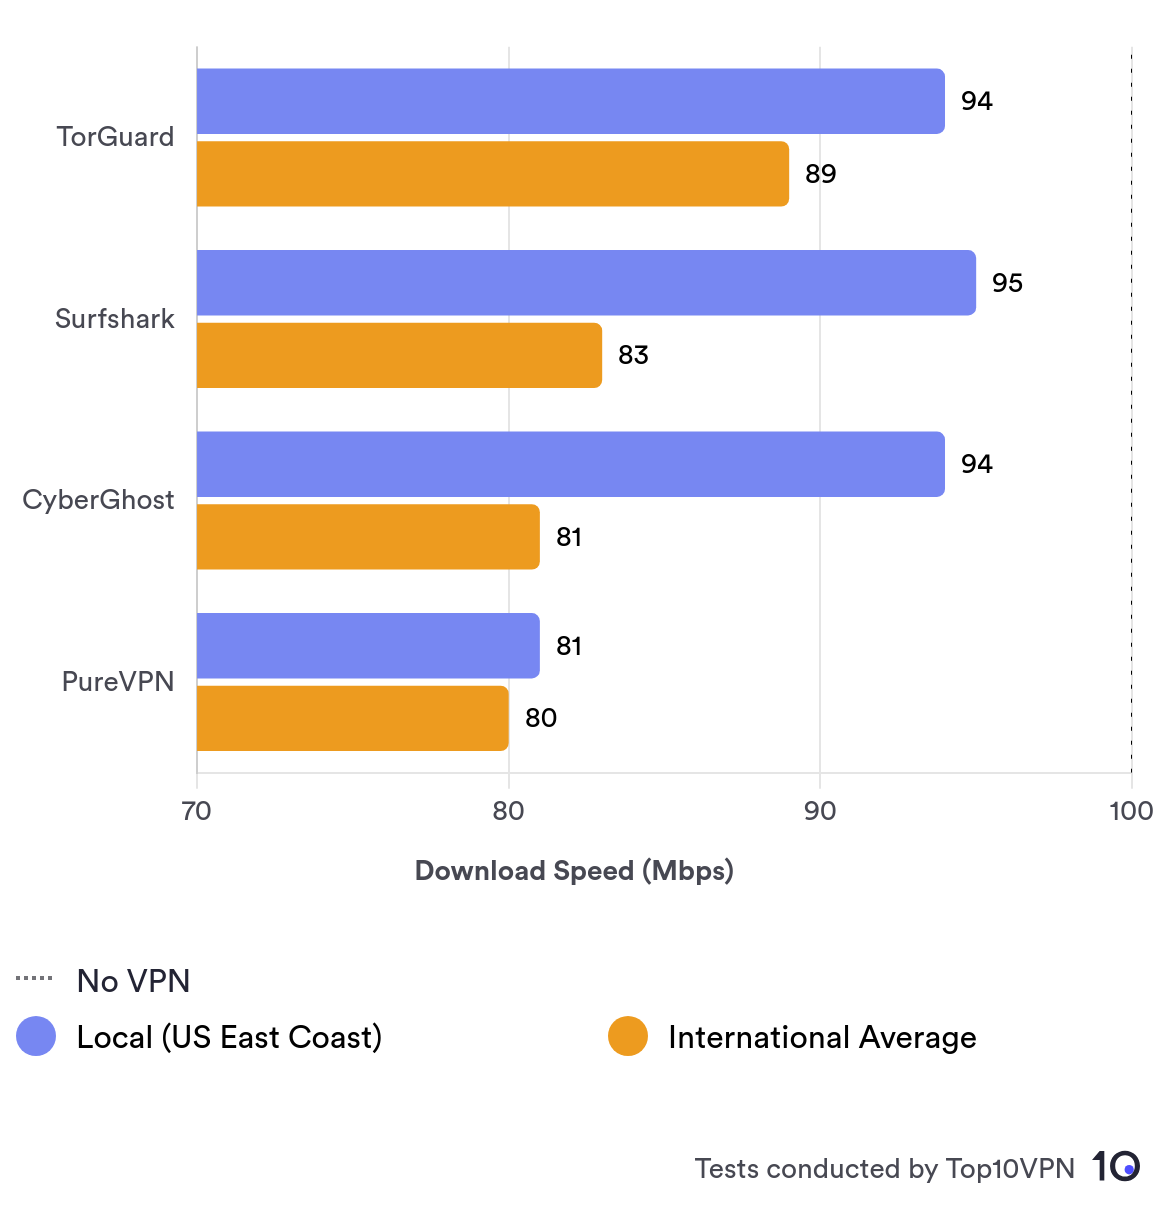 TorGuard's average international download speeds compared to Surfshark, CyberGhost, and PureVPN - it is faster than all of them.